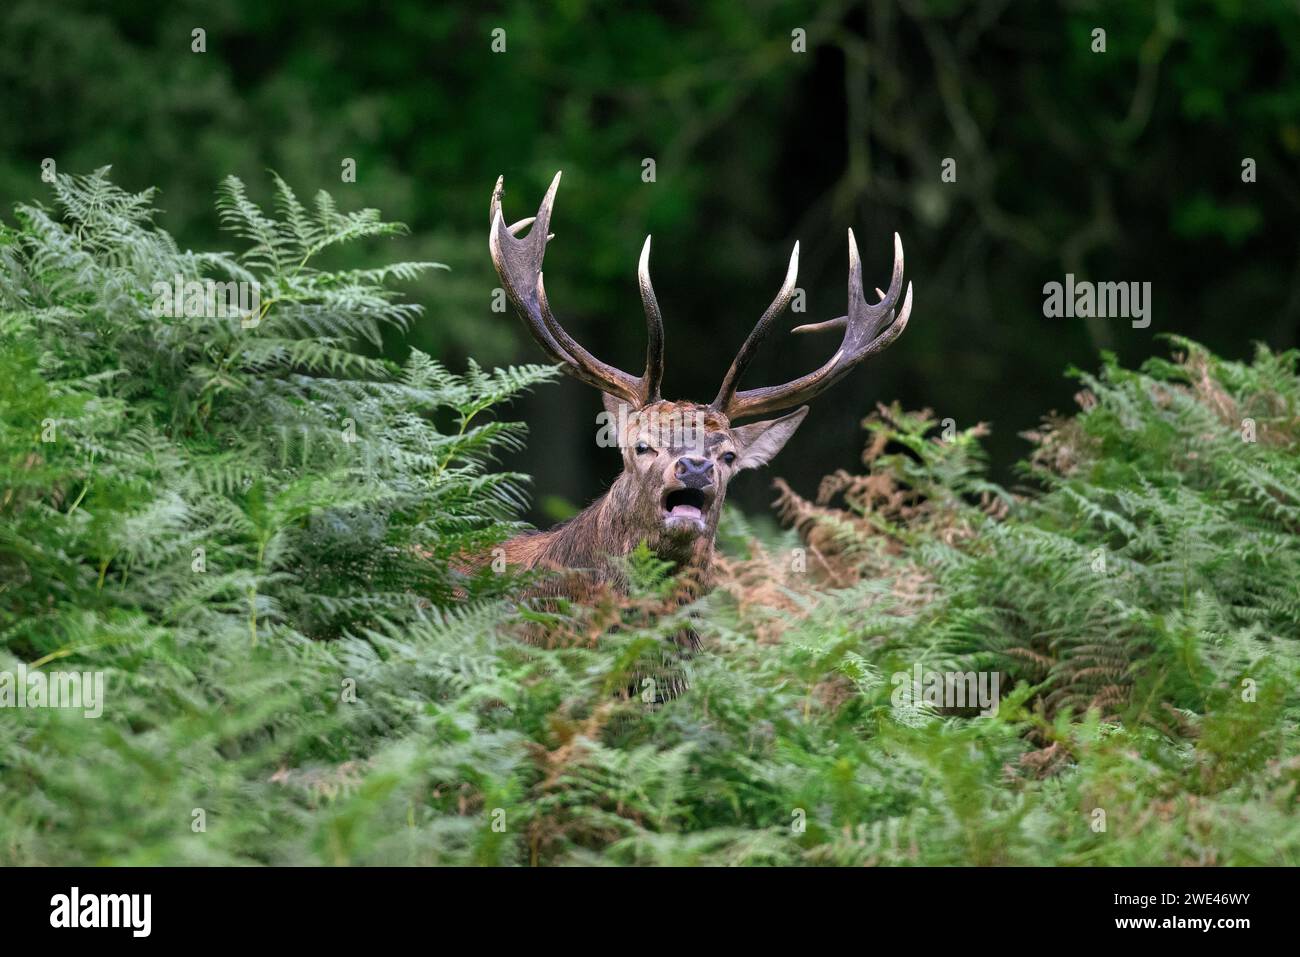 Red deer (Cervus elaphus) stag standing among bracken ferns while bellowing in forest during the rut in autumn / fall Stock Photo